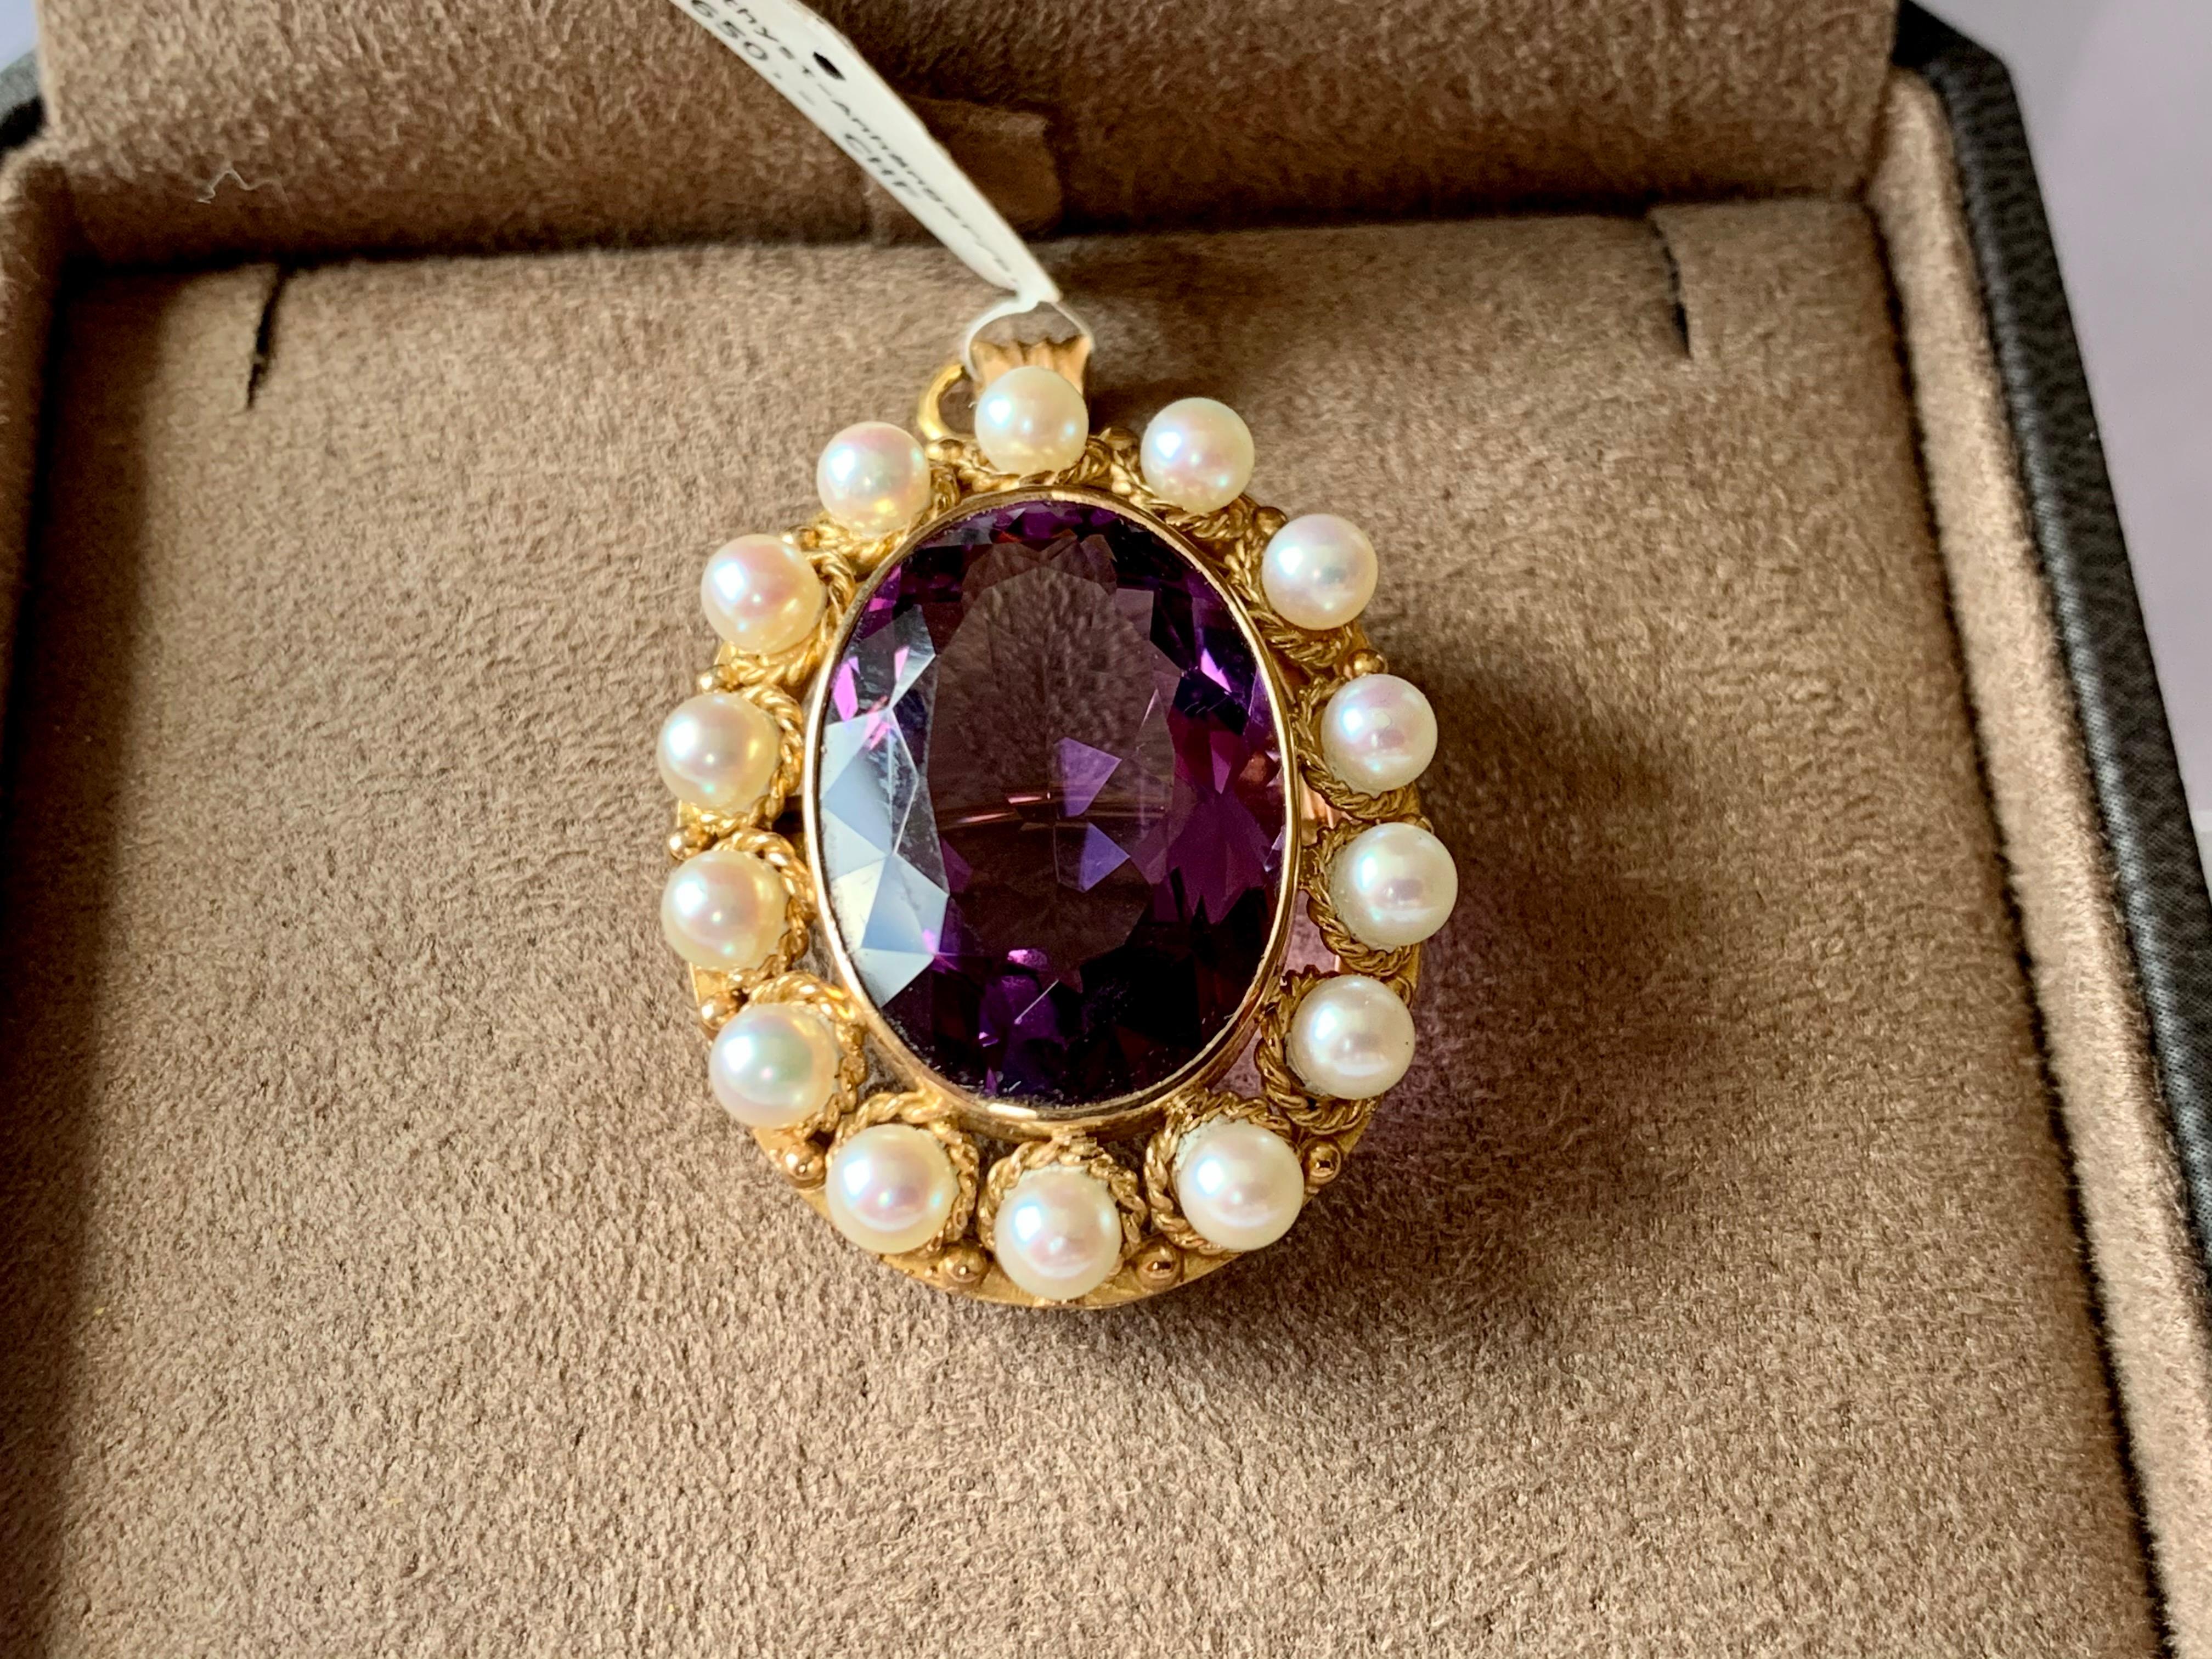 Women's or Men's Vintage 18 K Yellow Gold Victorian Inspired Brooch/Pendant Amethyst and Pearls For Sale